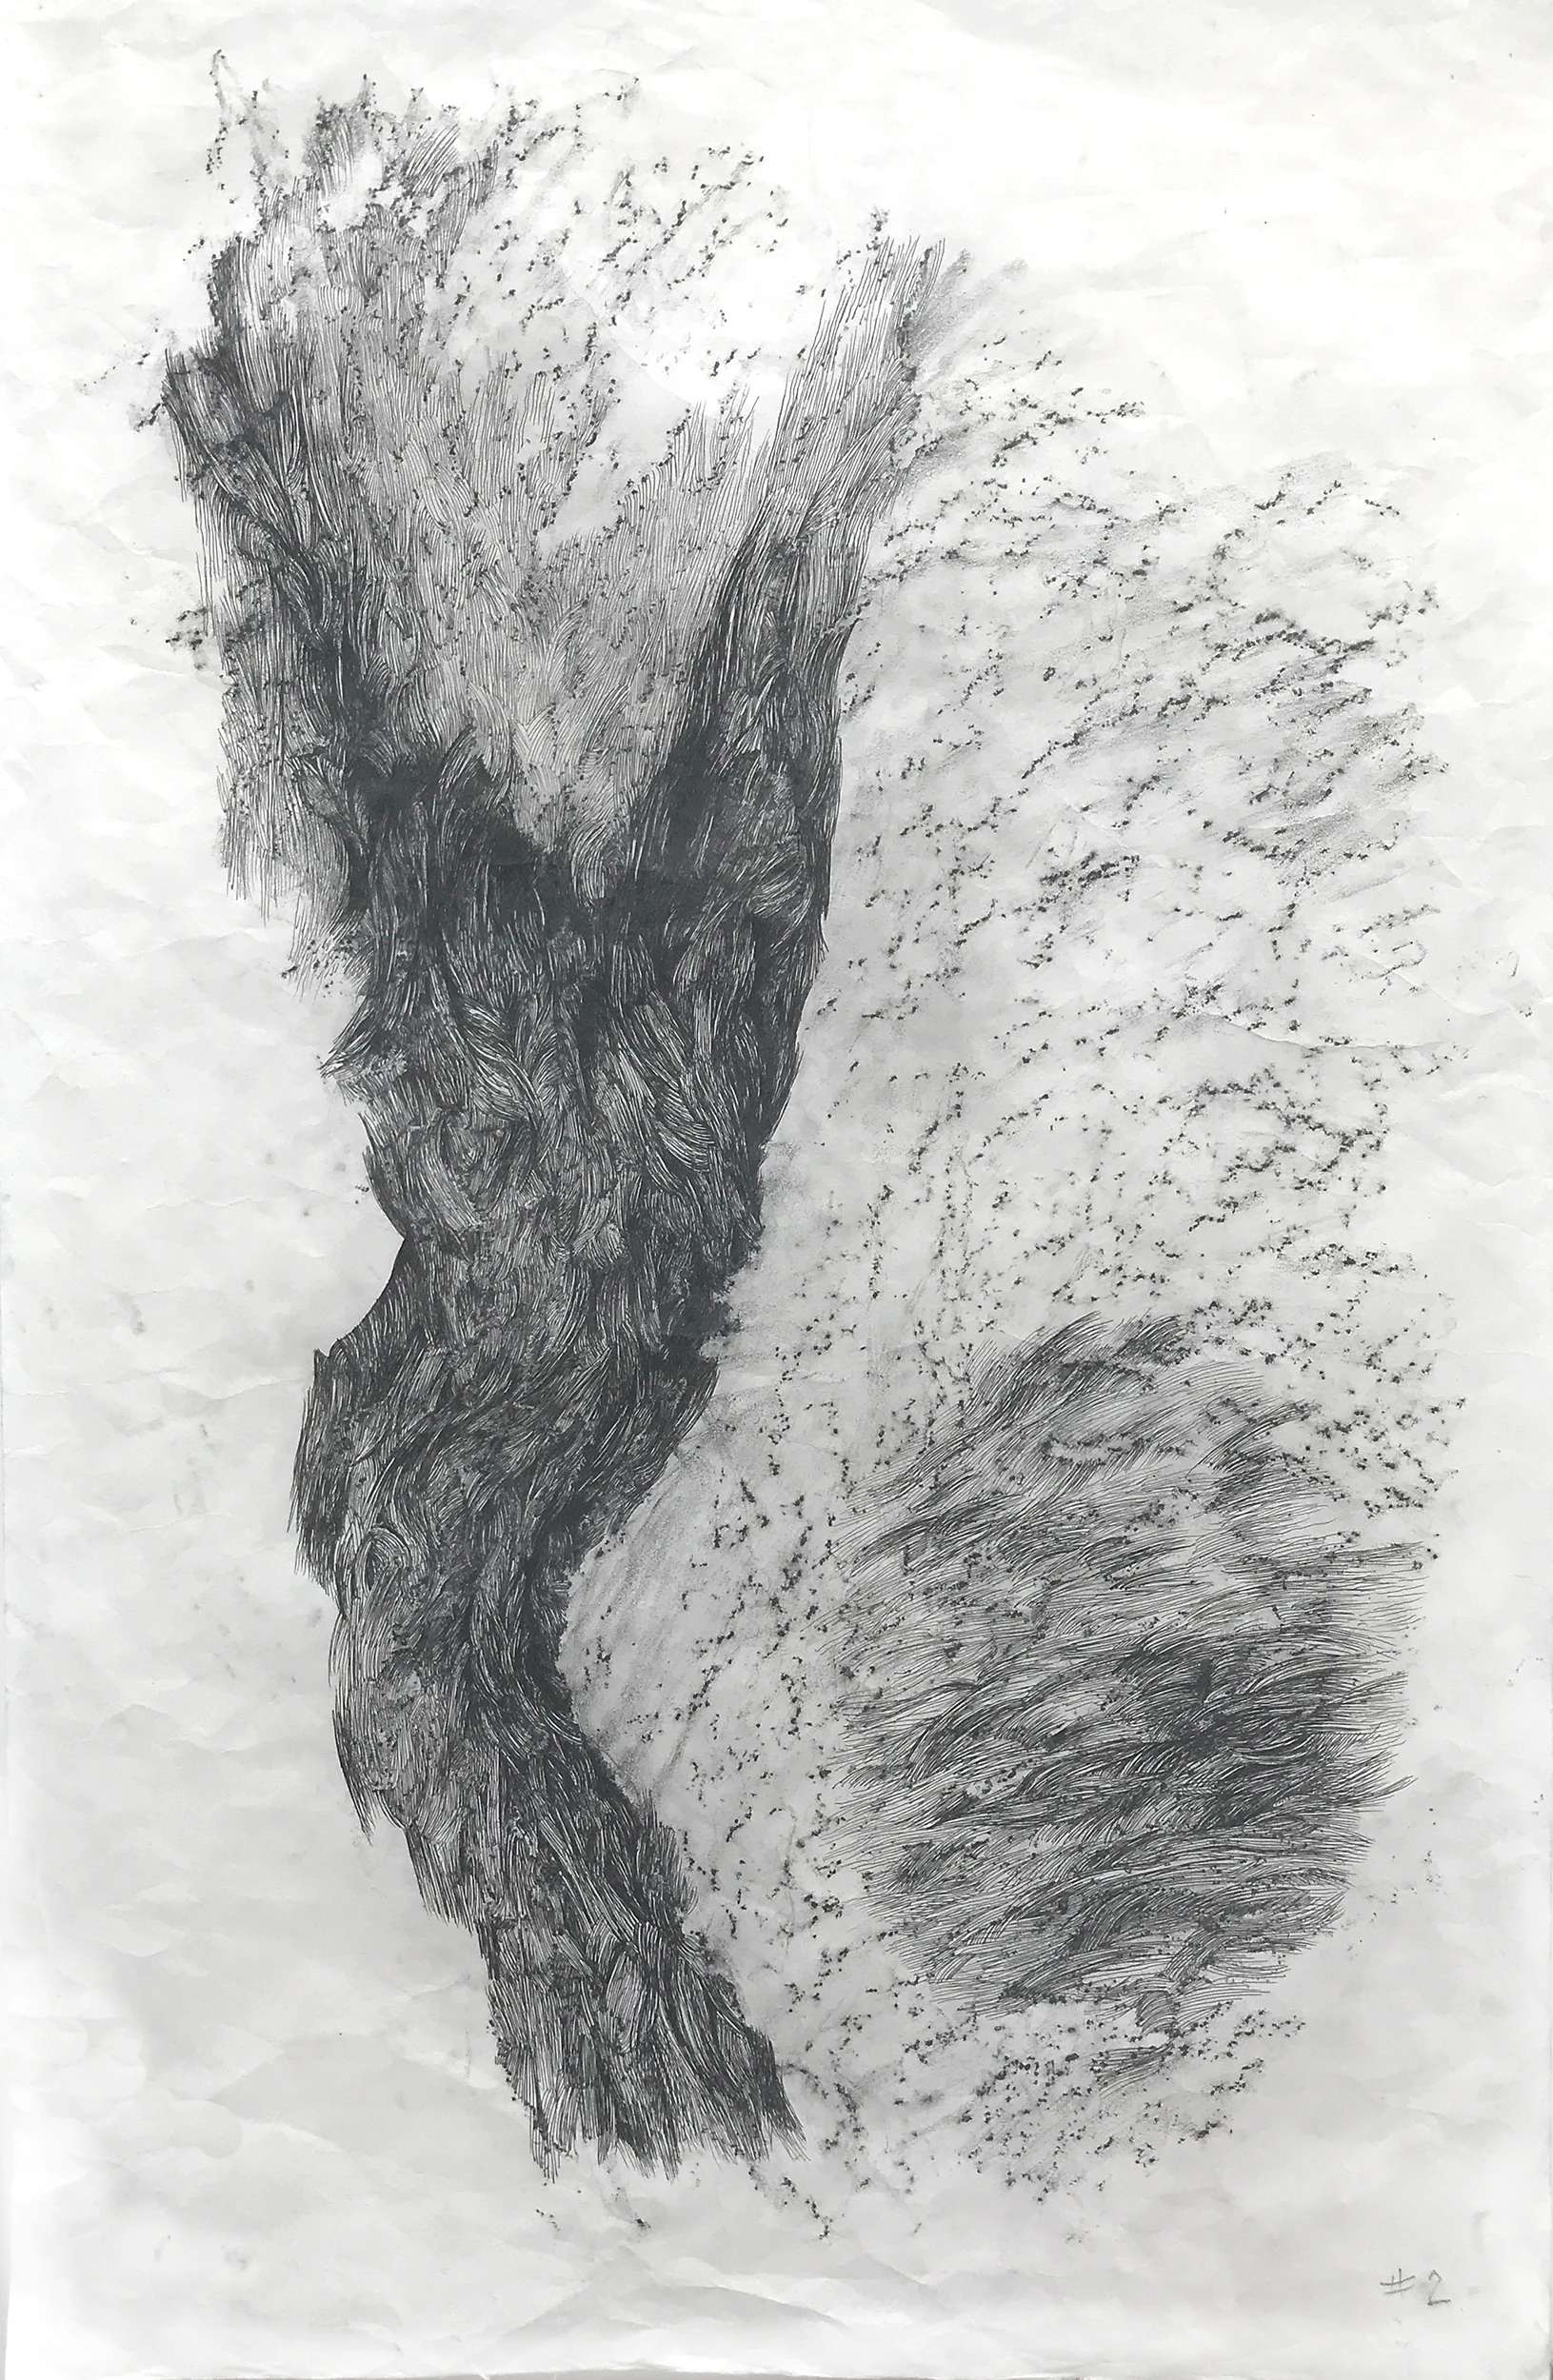 Ink and Graphite: A suite of drawings